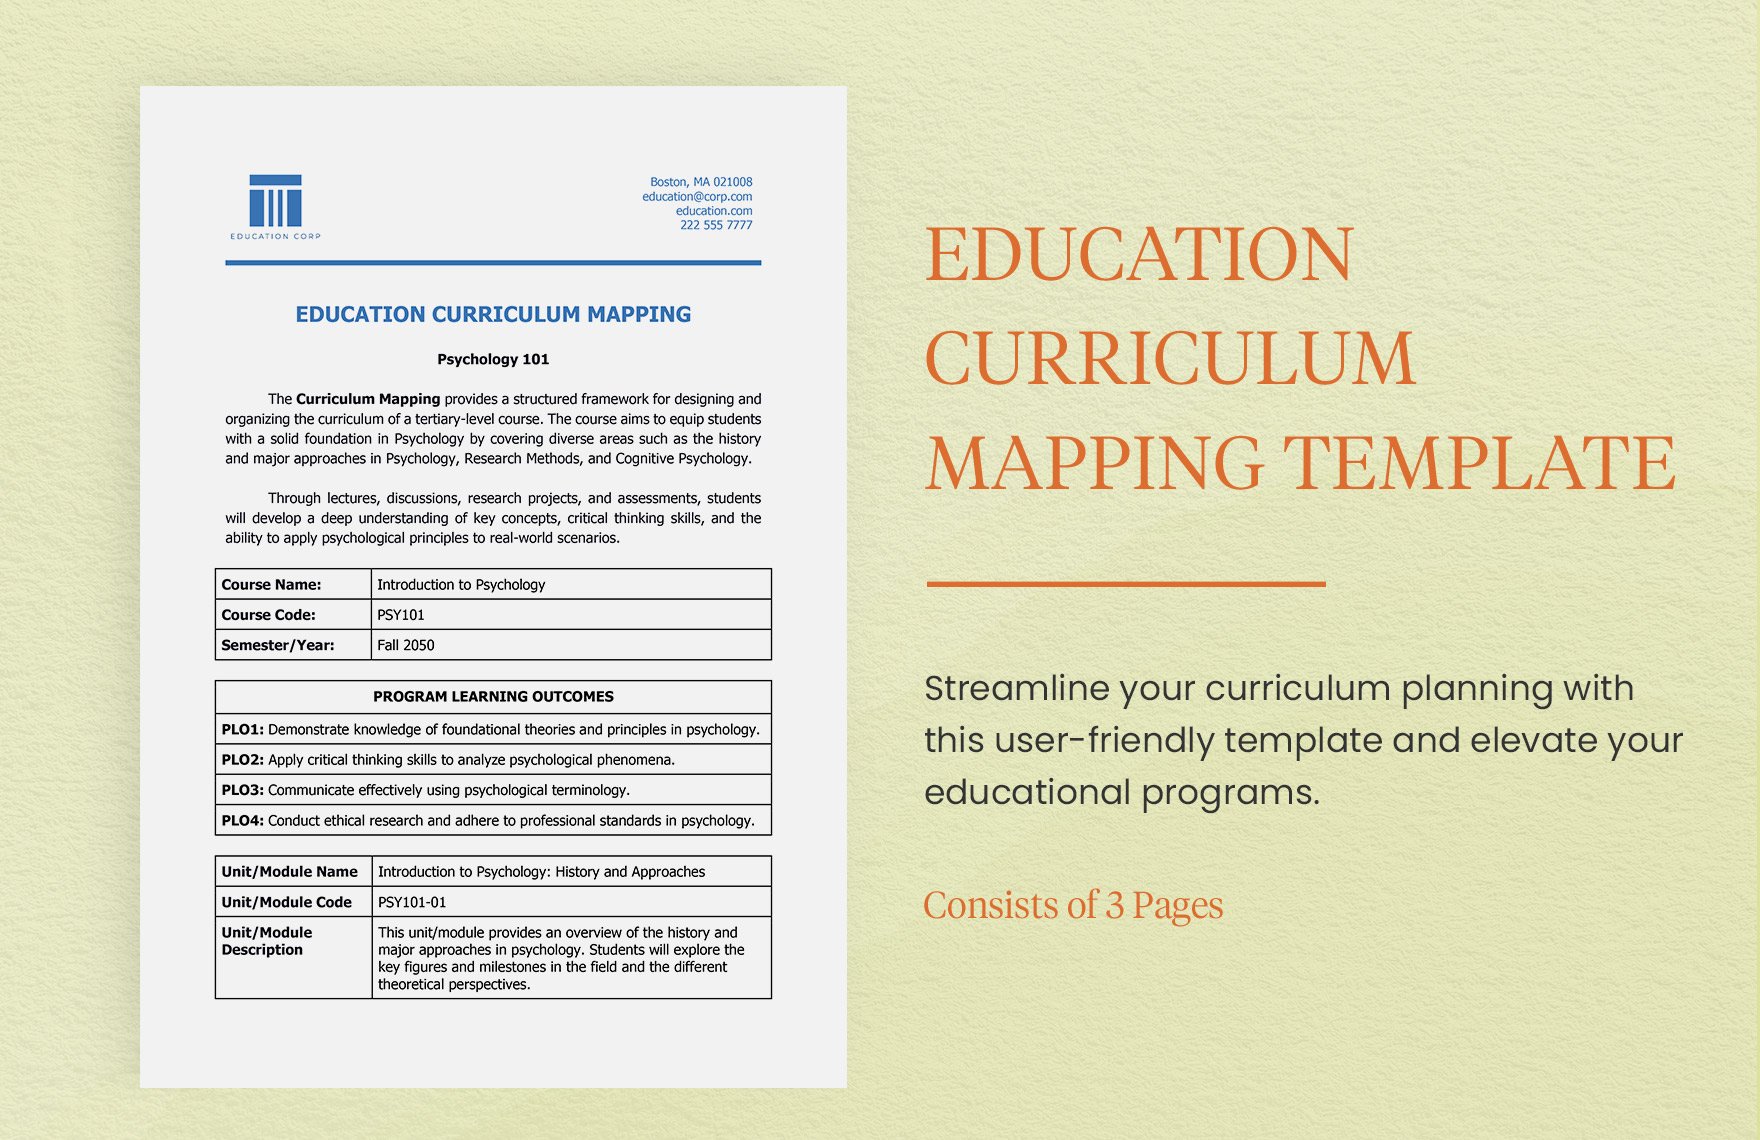 Education Curriculum Mapping Template in Word, Google Docs